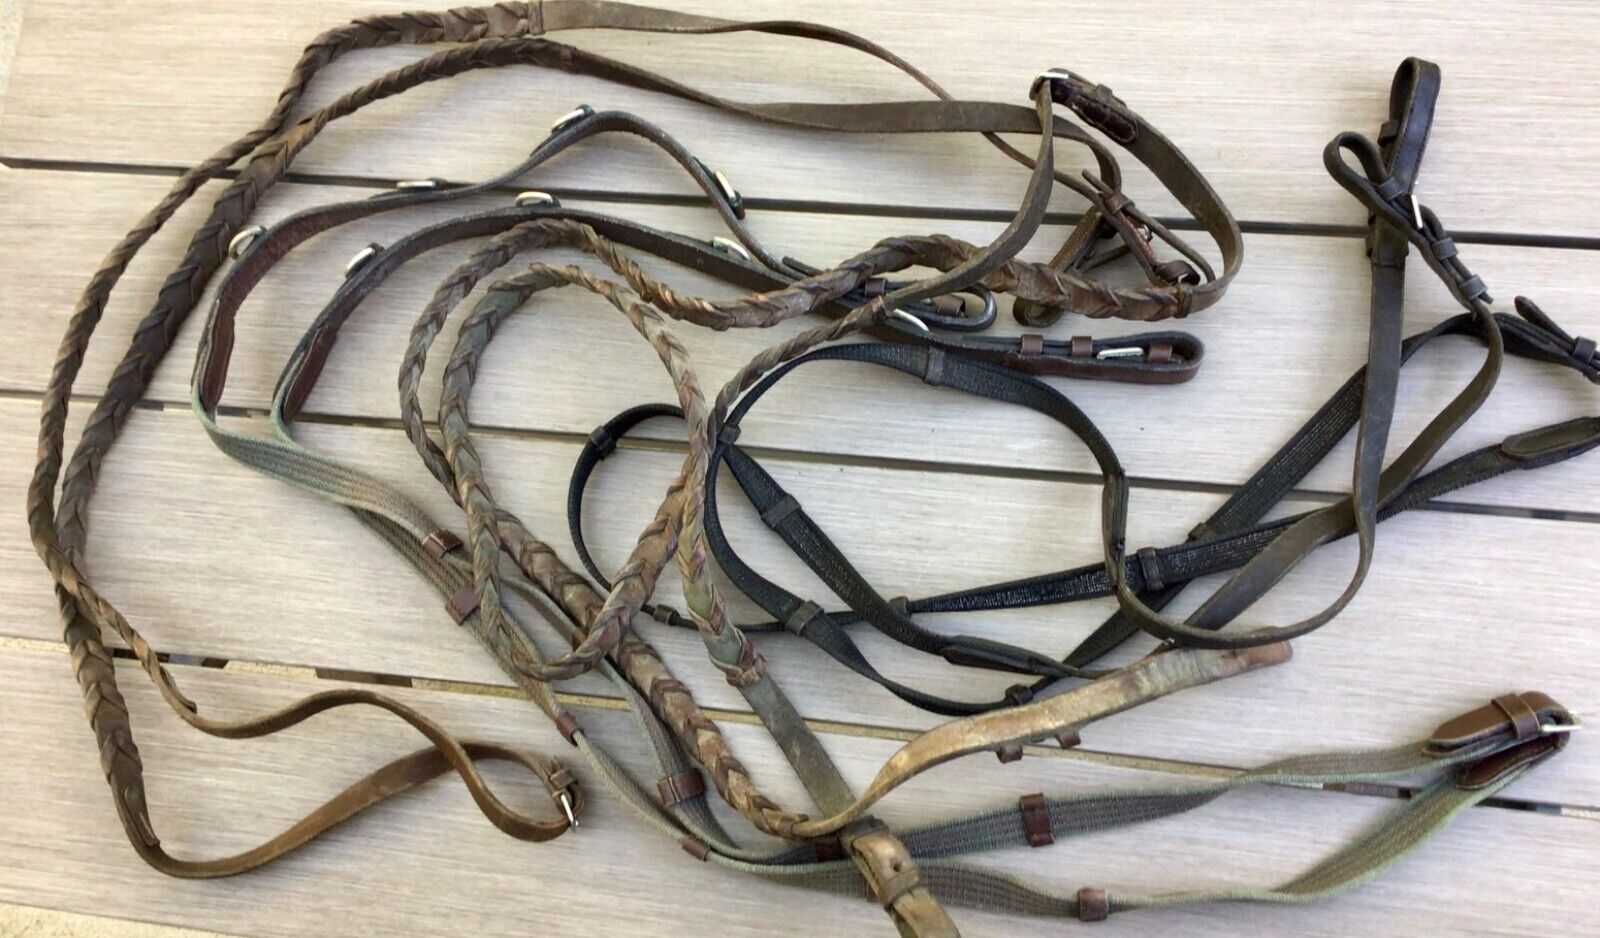 Lot Of 4 English Reins - Horse, Equestrian, Riding